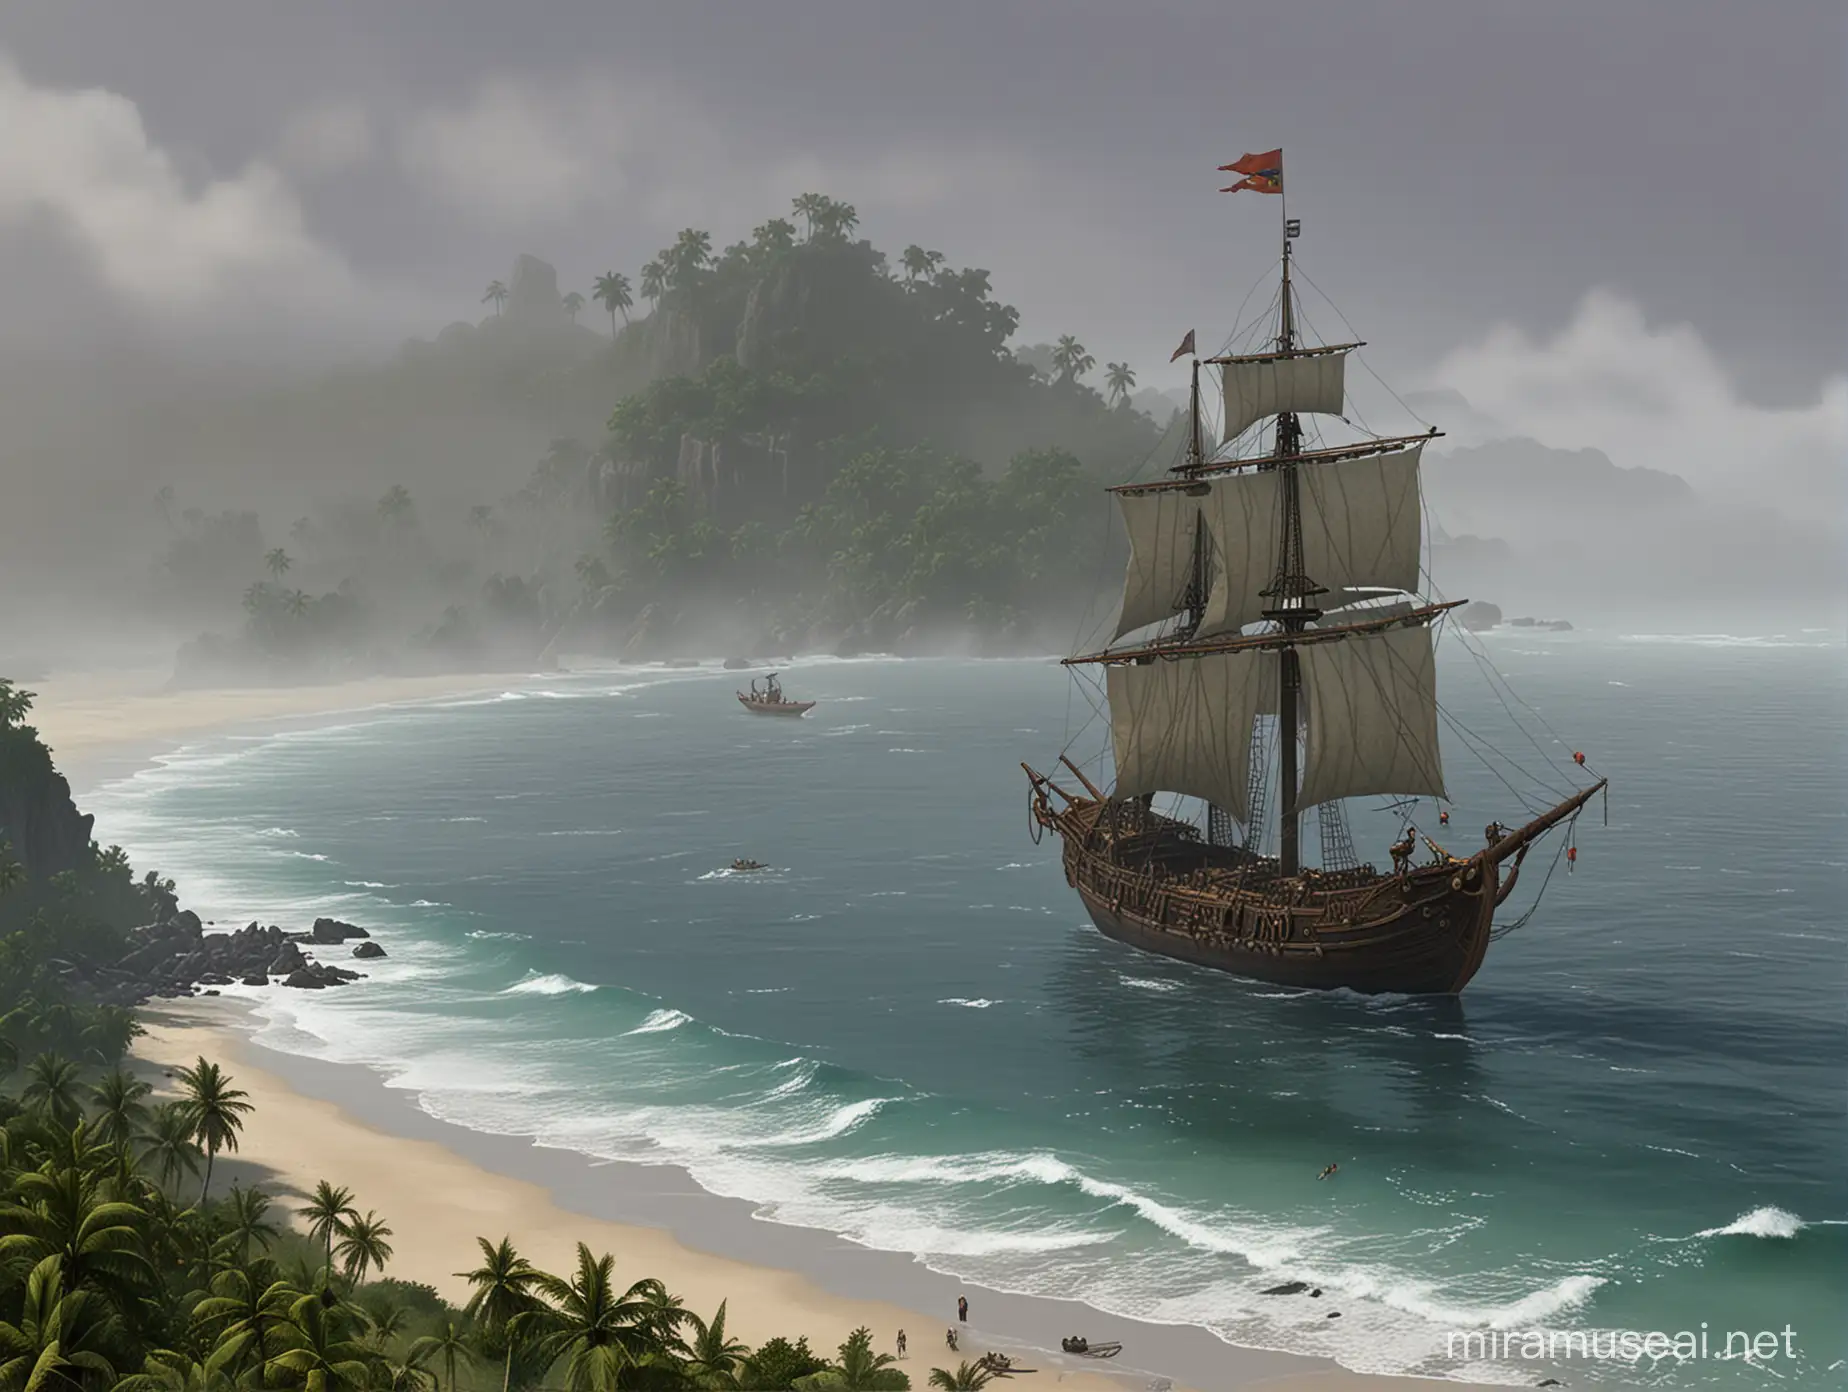 standing on the beach next to Papua village in Ultima Online, an Orcish ship can be seen a great distance away through the fog covering the sea.  